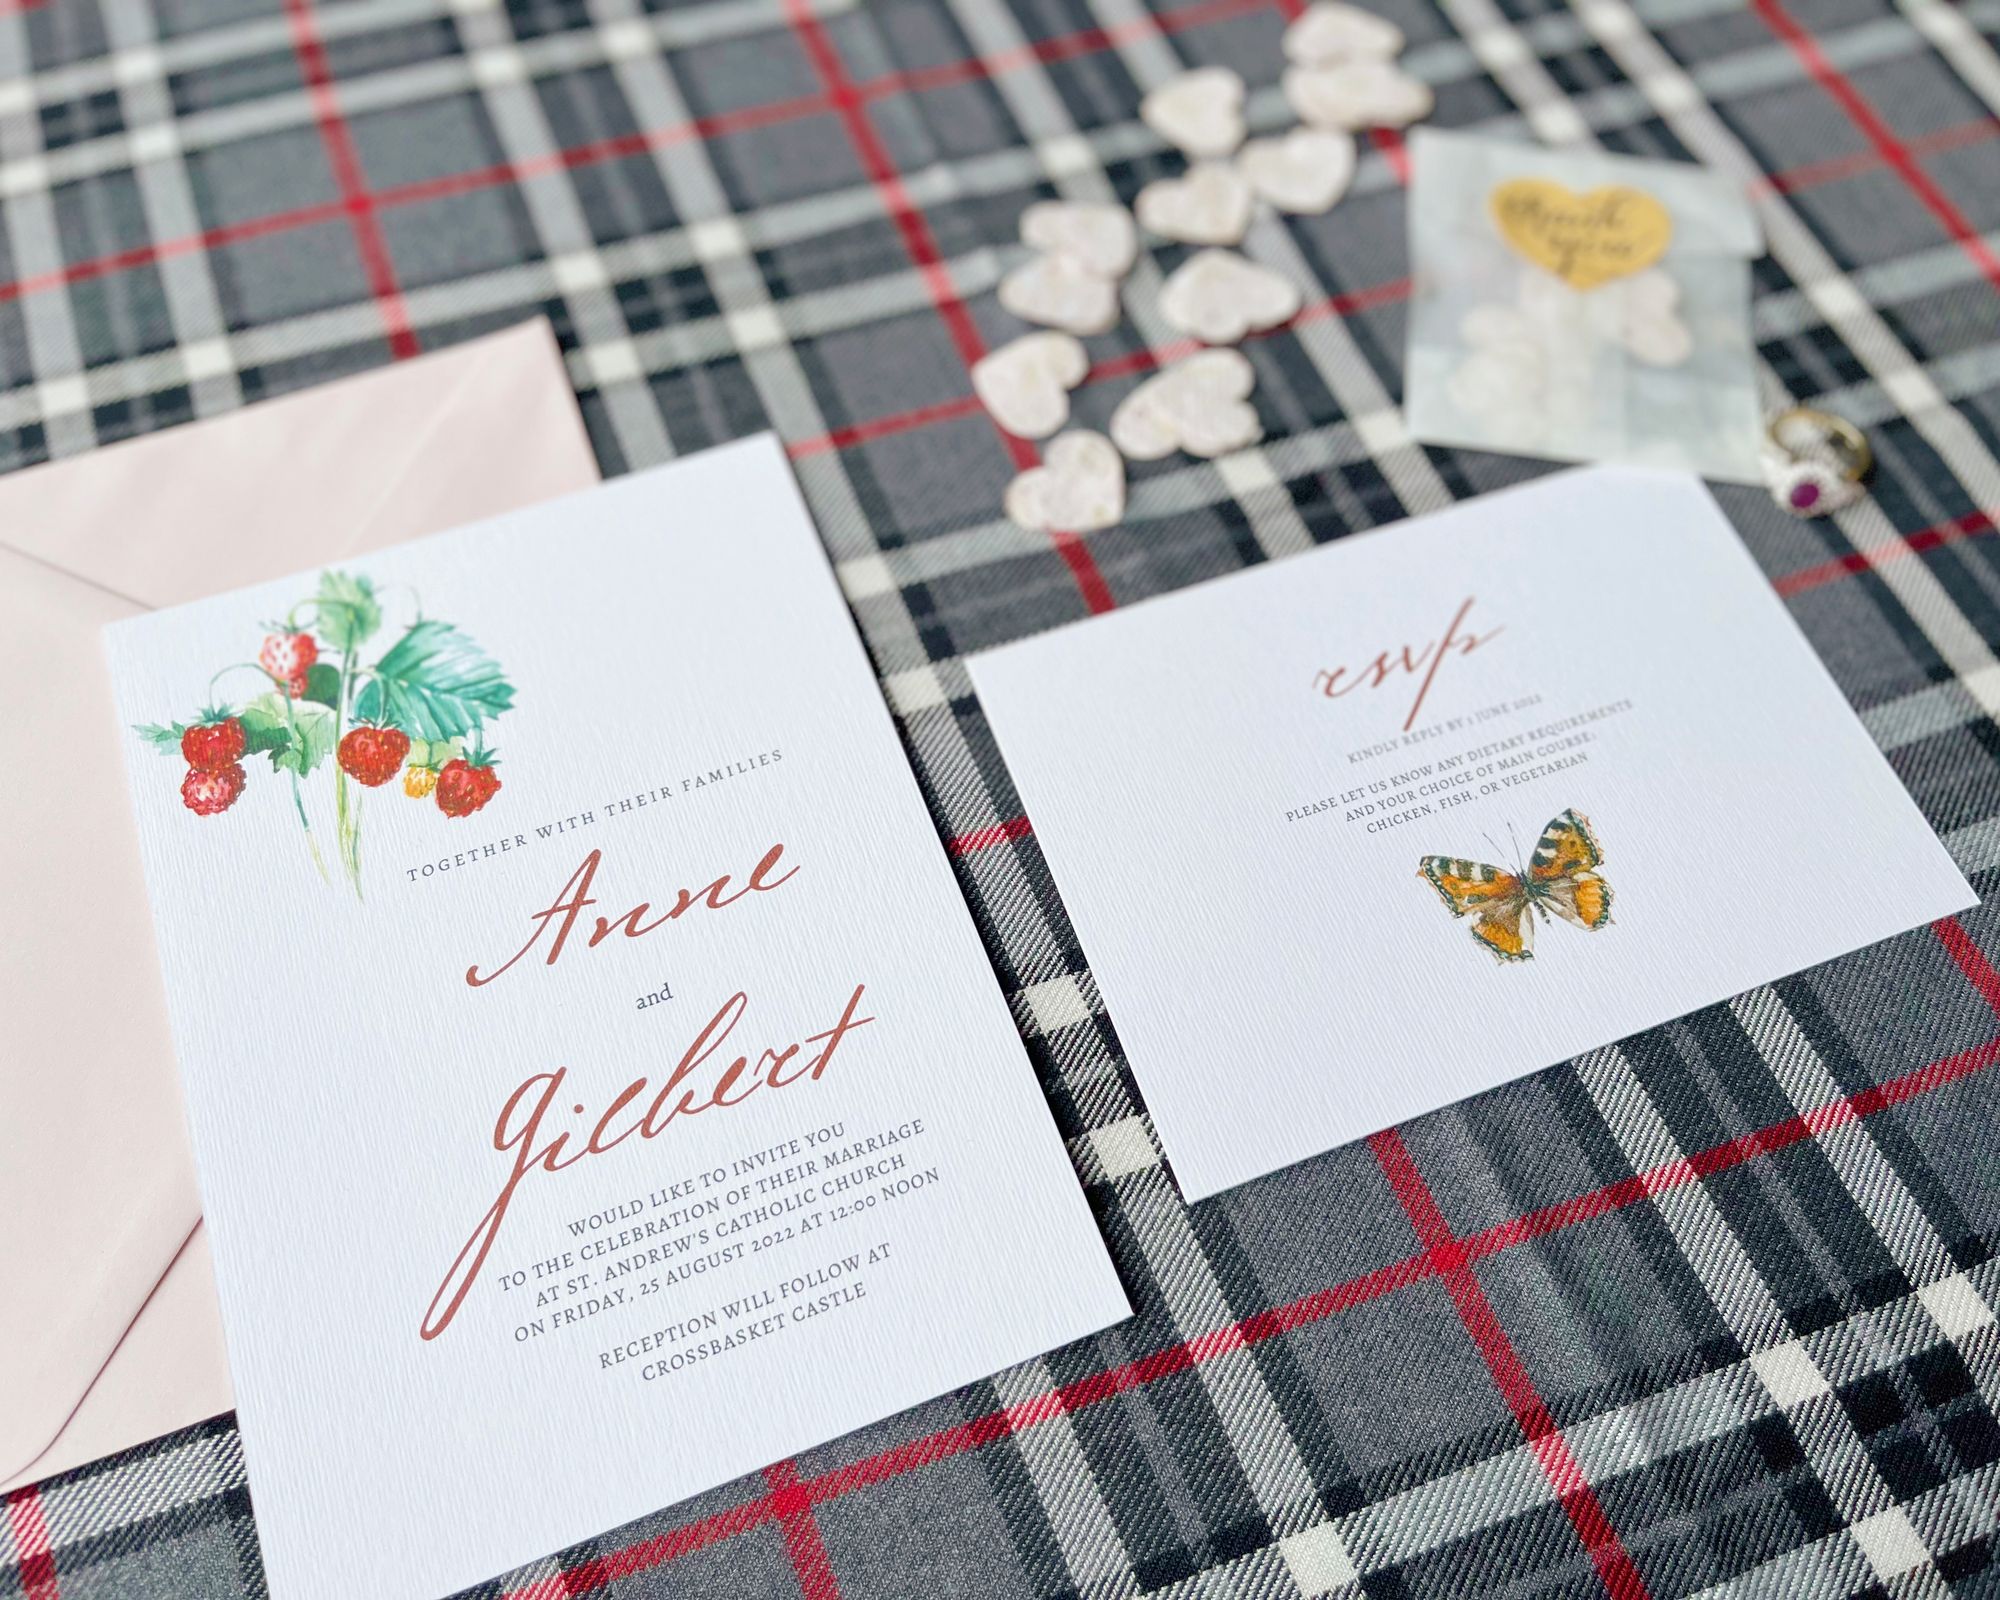 The 'Brig o' Doon' wedding invitation suite with matching plantable seed confetti